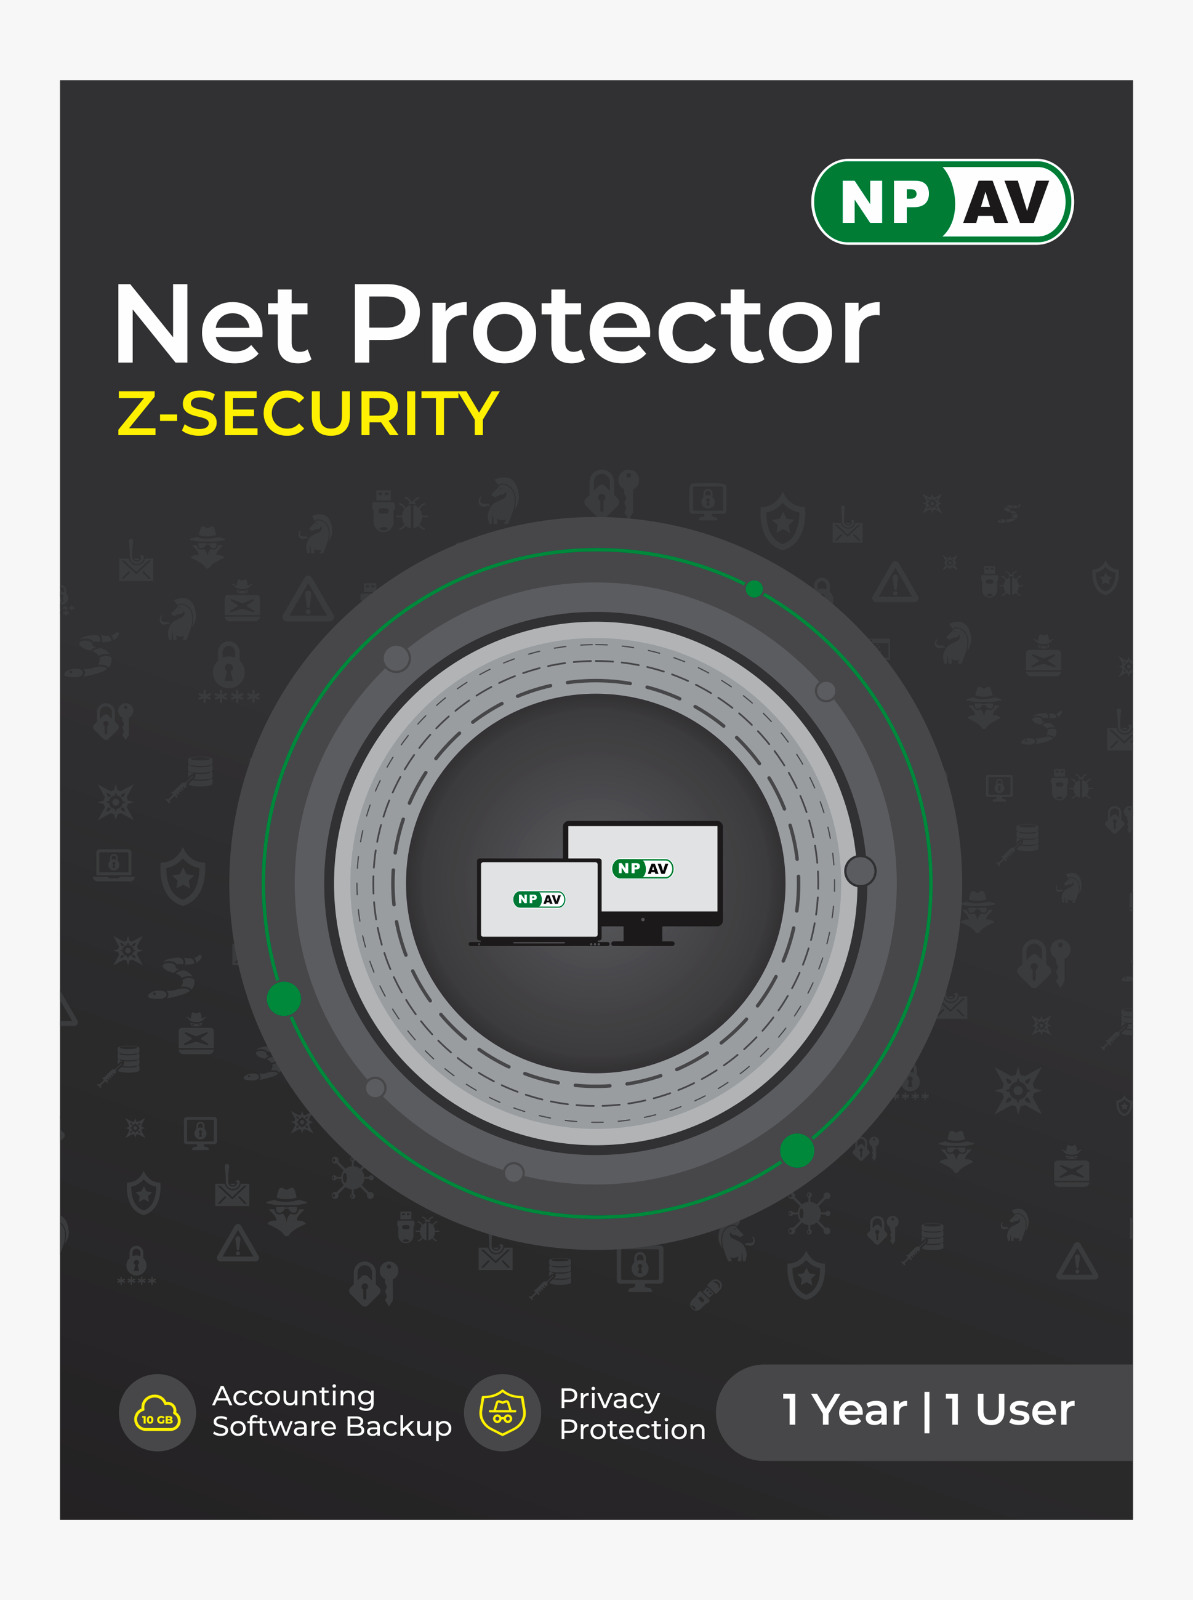 NET PROTECTOR Z-SECURITY
1 USER 1 YEAR